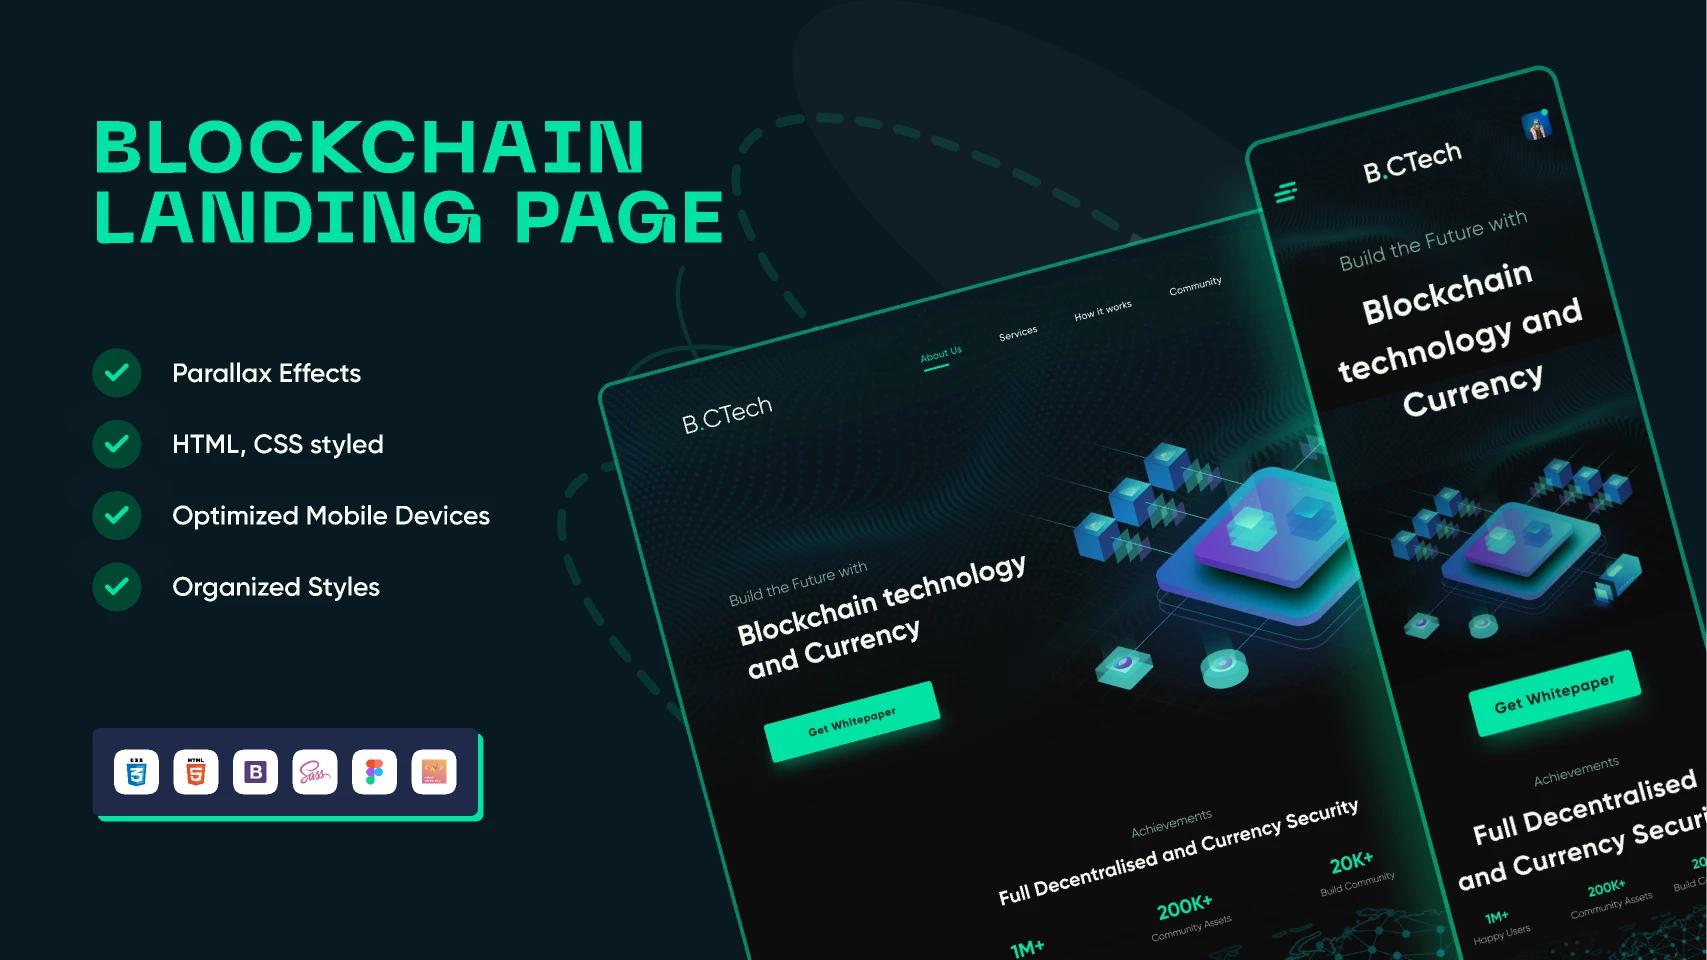 Blockchain Technology And Currency Exchange Landing Page UI UX Design for Figma and Adobe XD